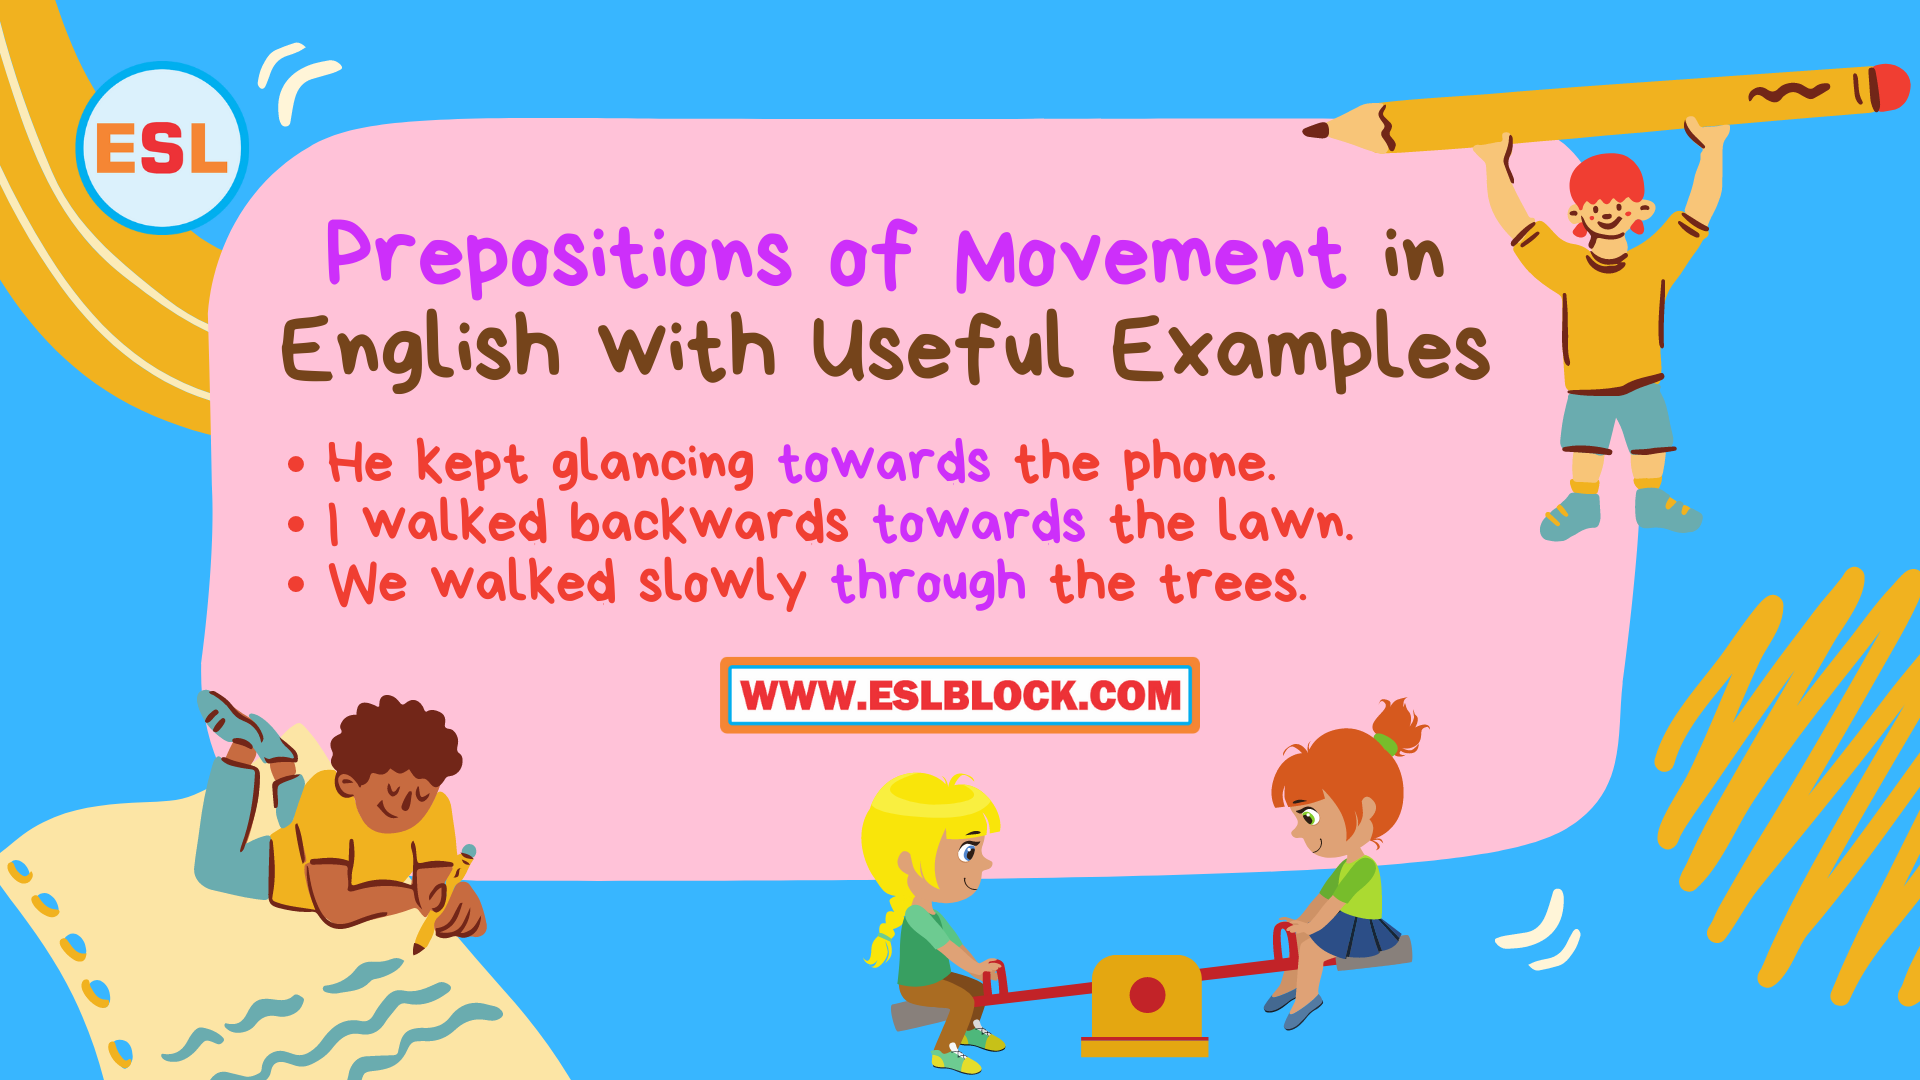 100 Example Sentences Using Prepositions of Movement, All Prepositions of Movement, List of Prepositions, Prepositional Vocabulary, Prepositions of Movement, Prepositions of Movement vocabulary, Prepositions of Movement with Example Sentences, Types of Prepositions, Types of Prepositions with Example Sentences, What are Prepositions, What are Prepositions of Movement, What are the types of Prepositions, What is a Preposition